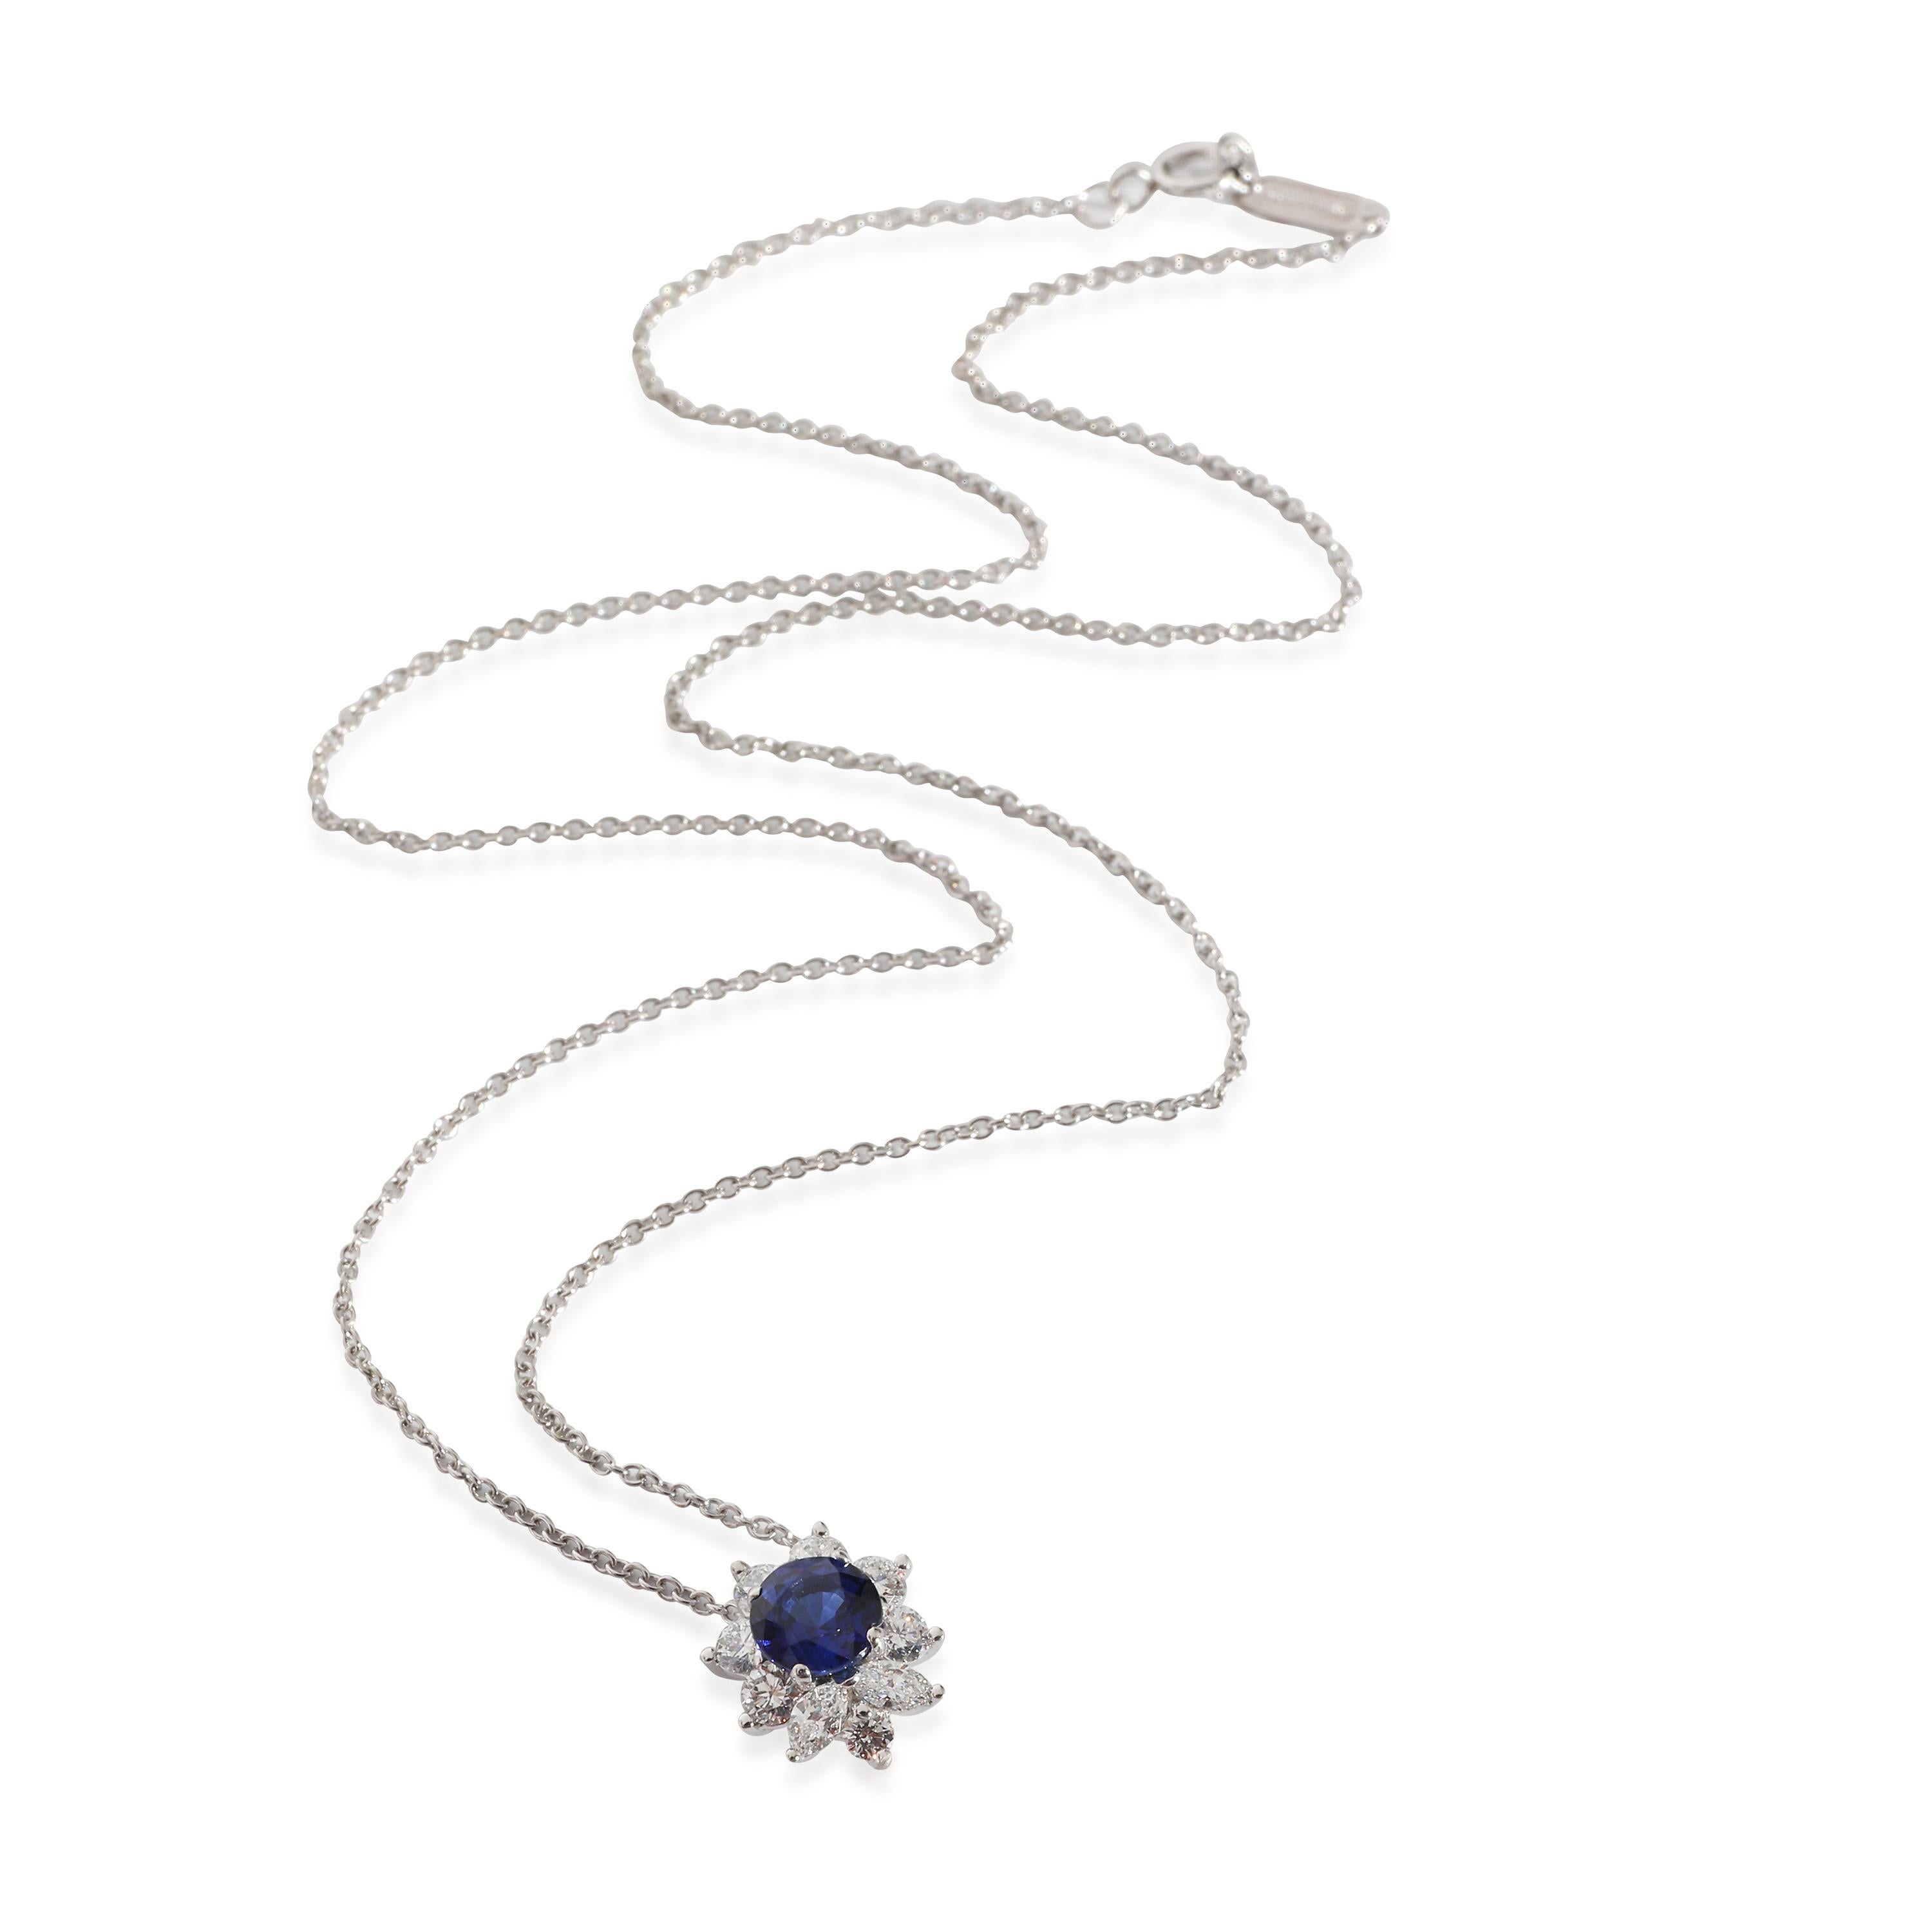 Tiffany & Co. Victoria Sapphire Diamond Pendant in Platinum 0.53 CTW

PRIMARY DETAILS
SKU: 134151
Listing Title: Tiffany & Co. Victoria Sapphire Diamond Pendant in Platinum 0.53 CTW
Condition Description: An ode to the natural world, the Victoria